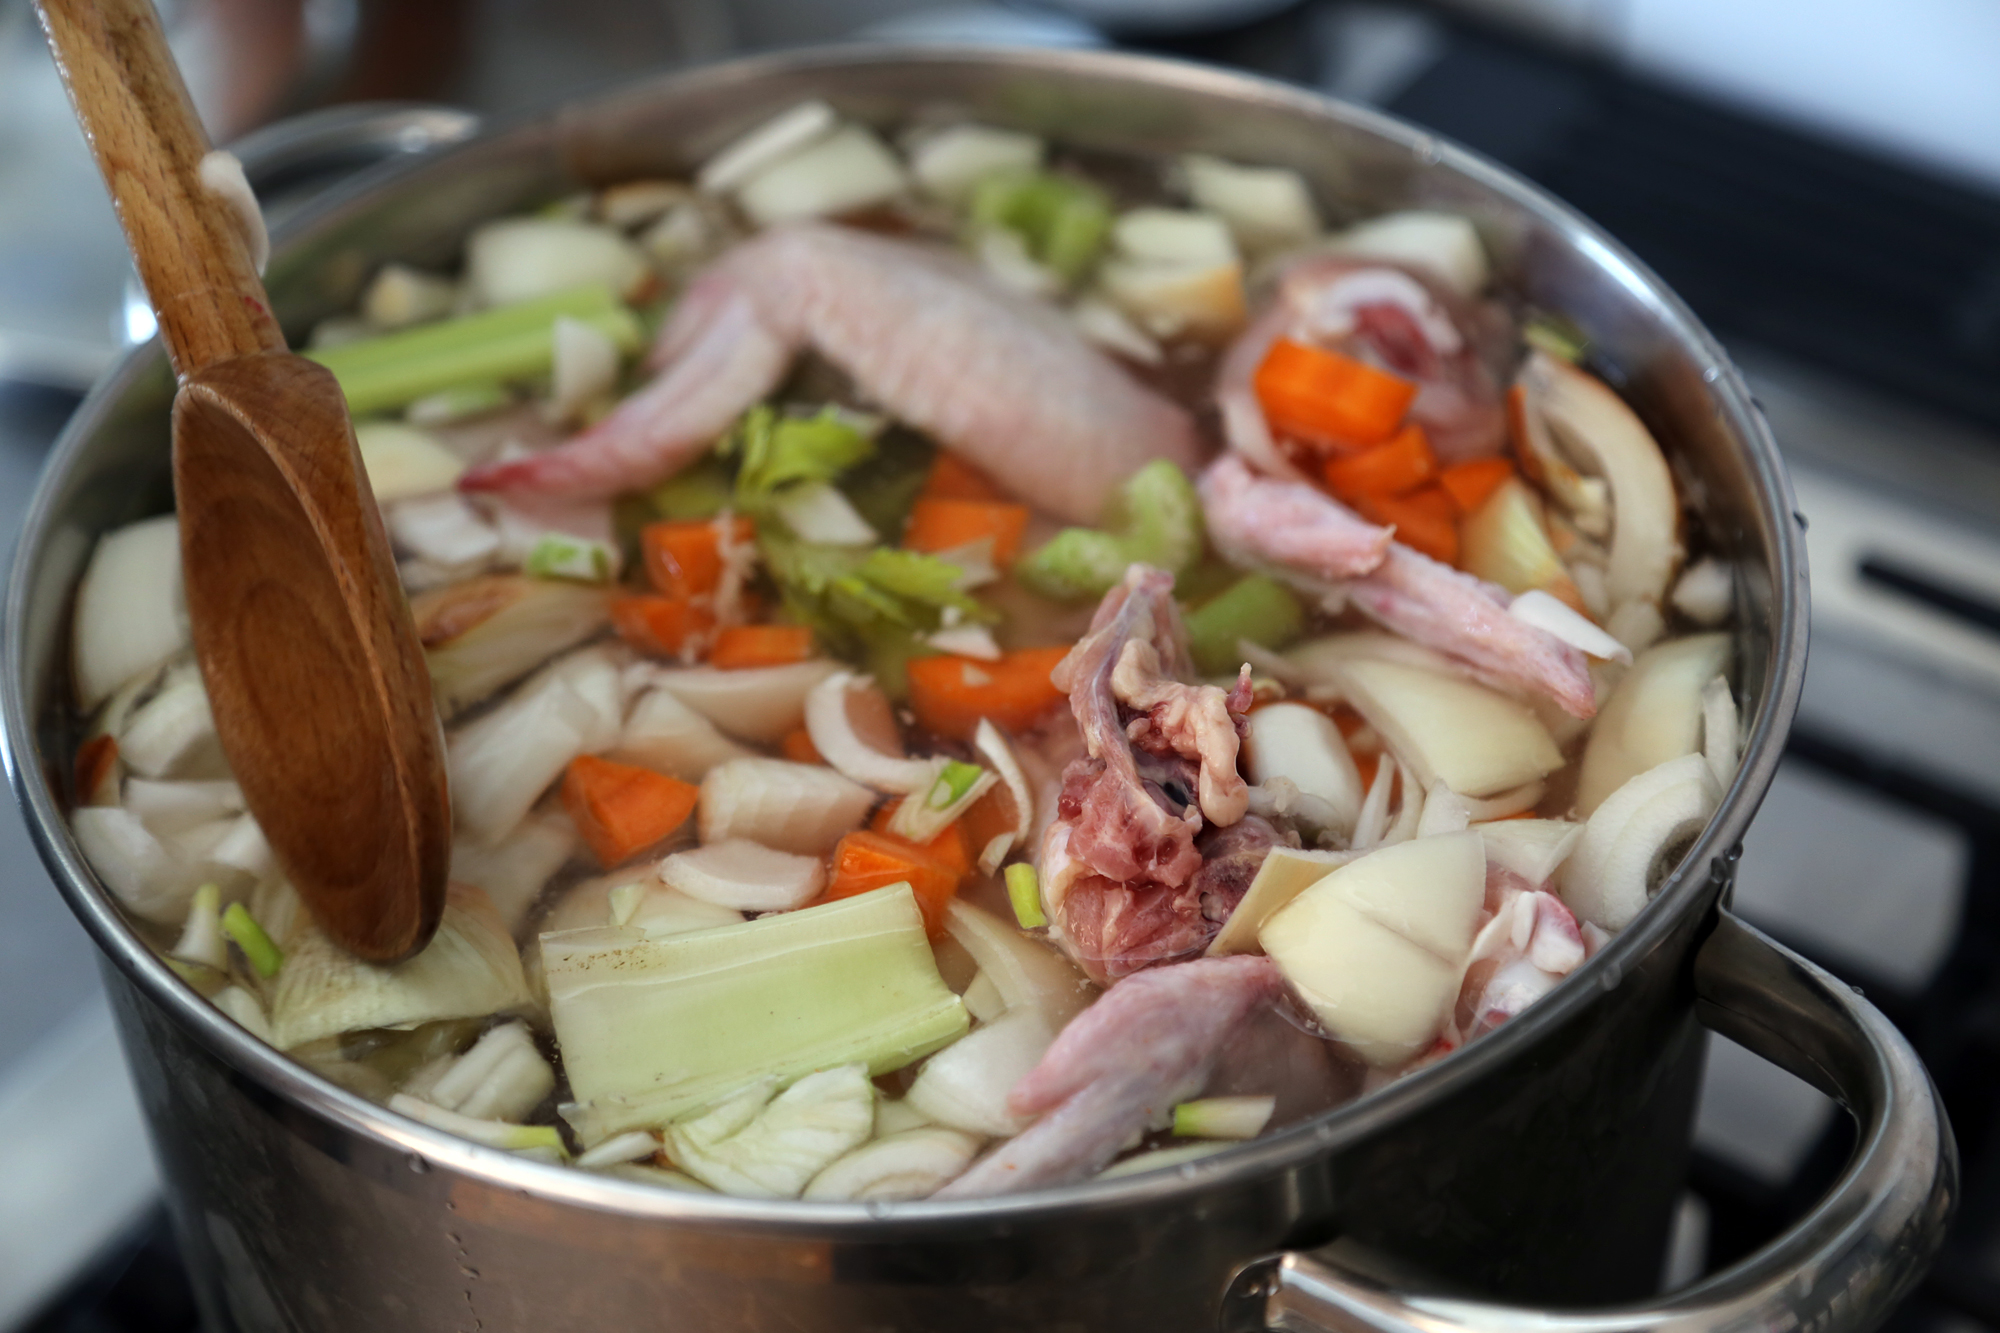 Combine the chicken parts, water, onion, carrots, celery, and parsley. Bring to a simmer over medium heat.